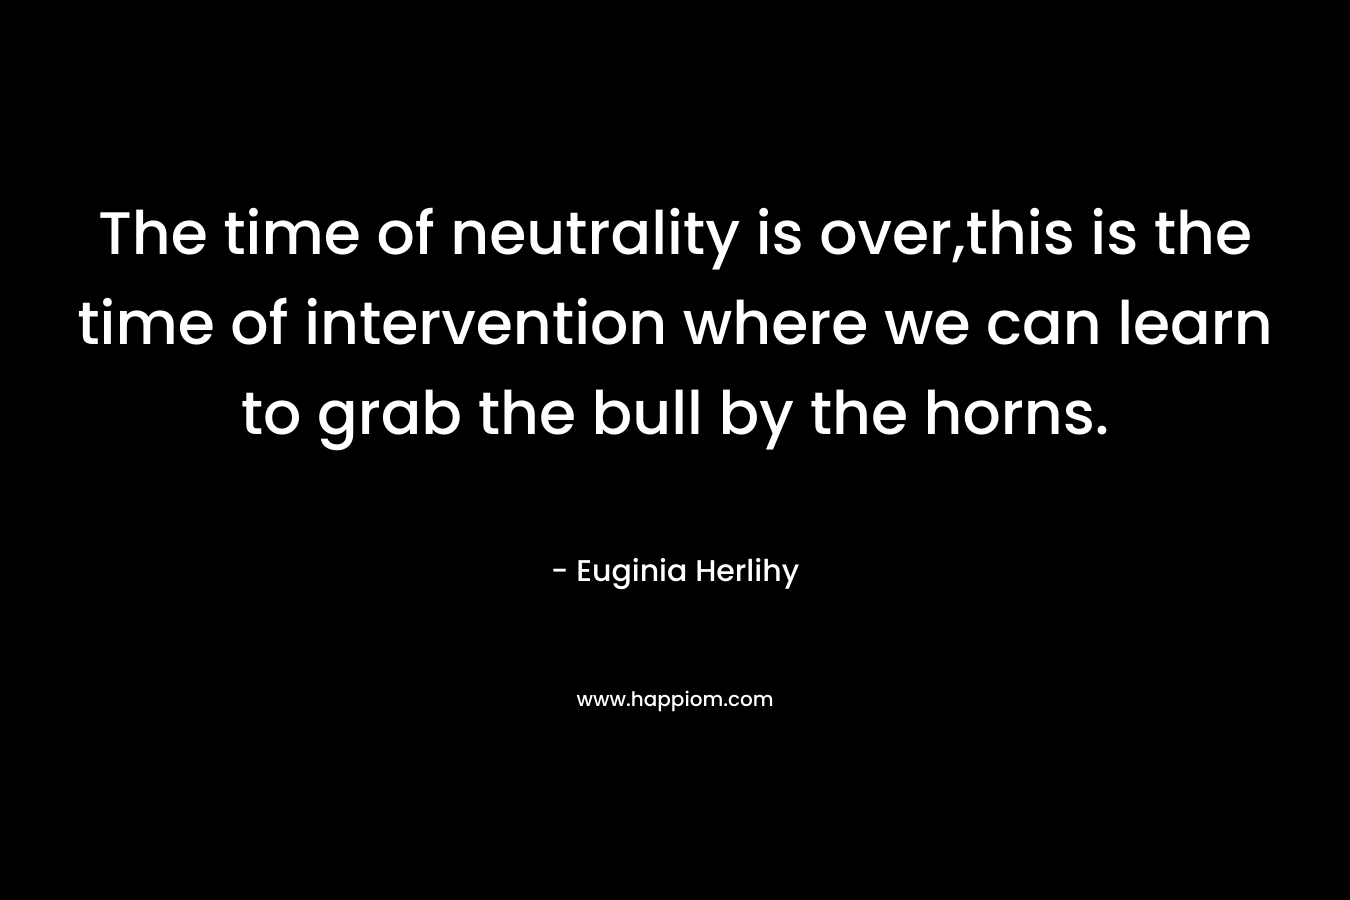 The time of neutrality is over,this is the time of intervention where we can learn to grab the bull by the horns.